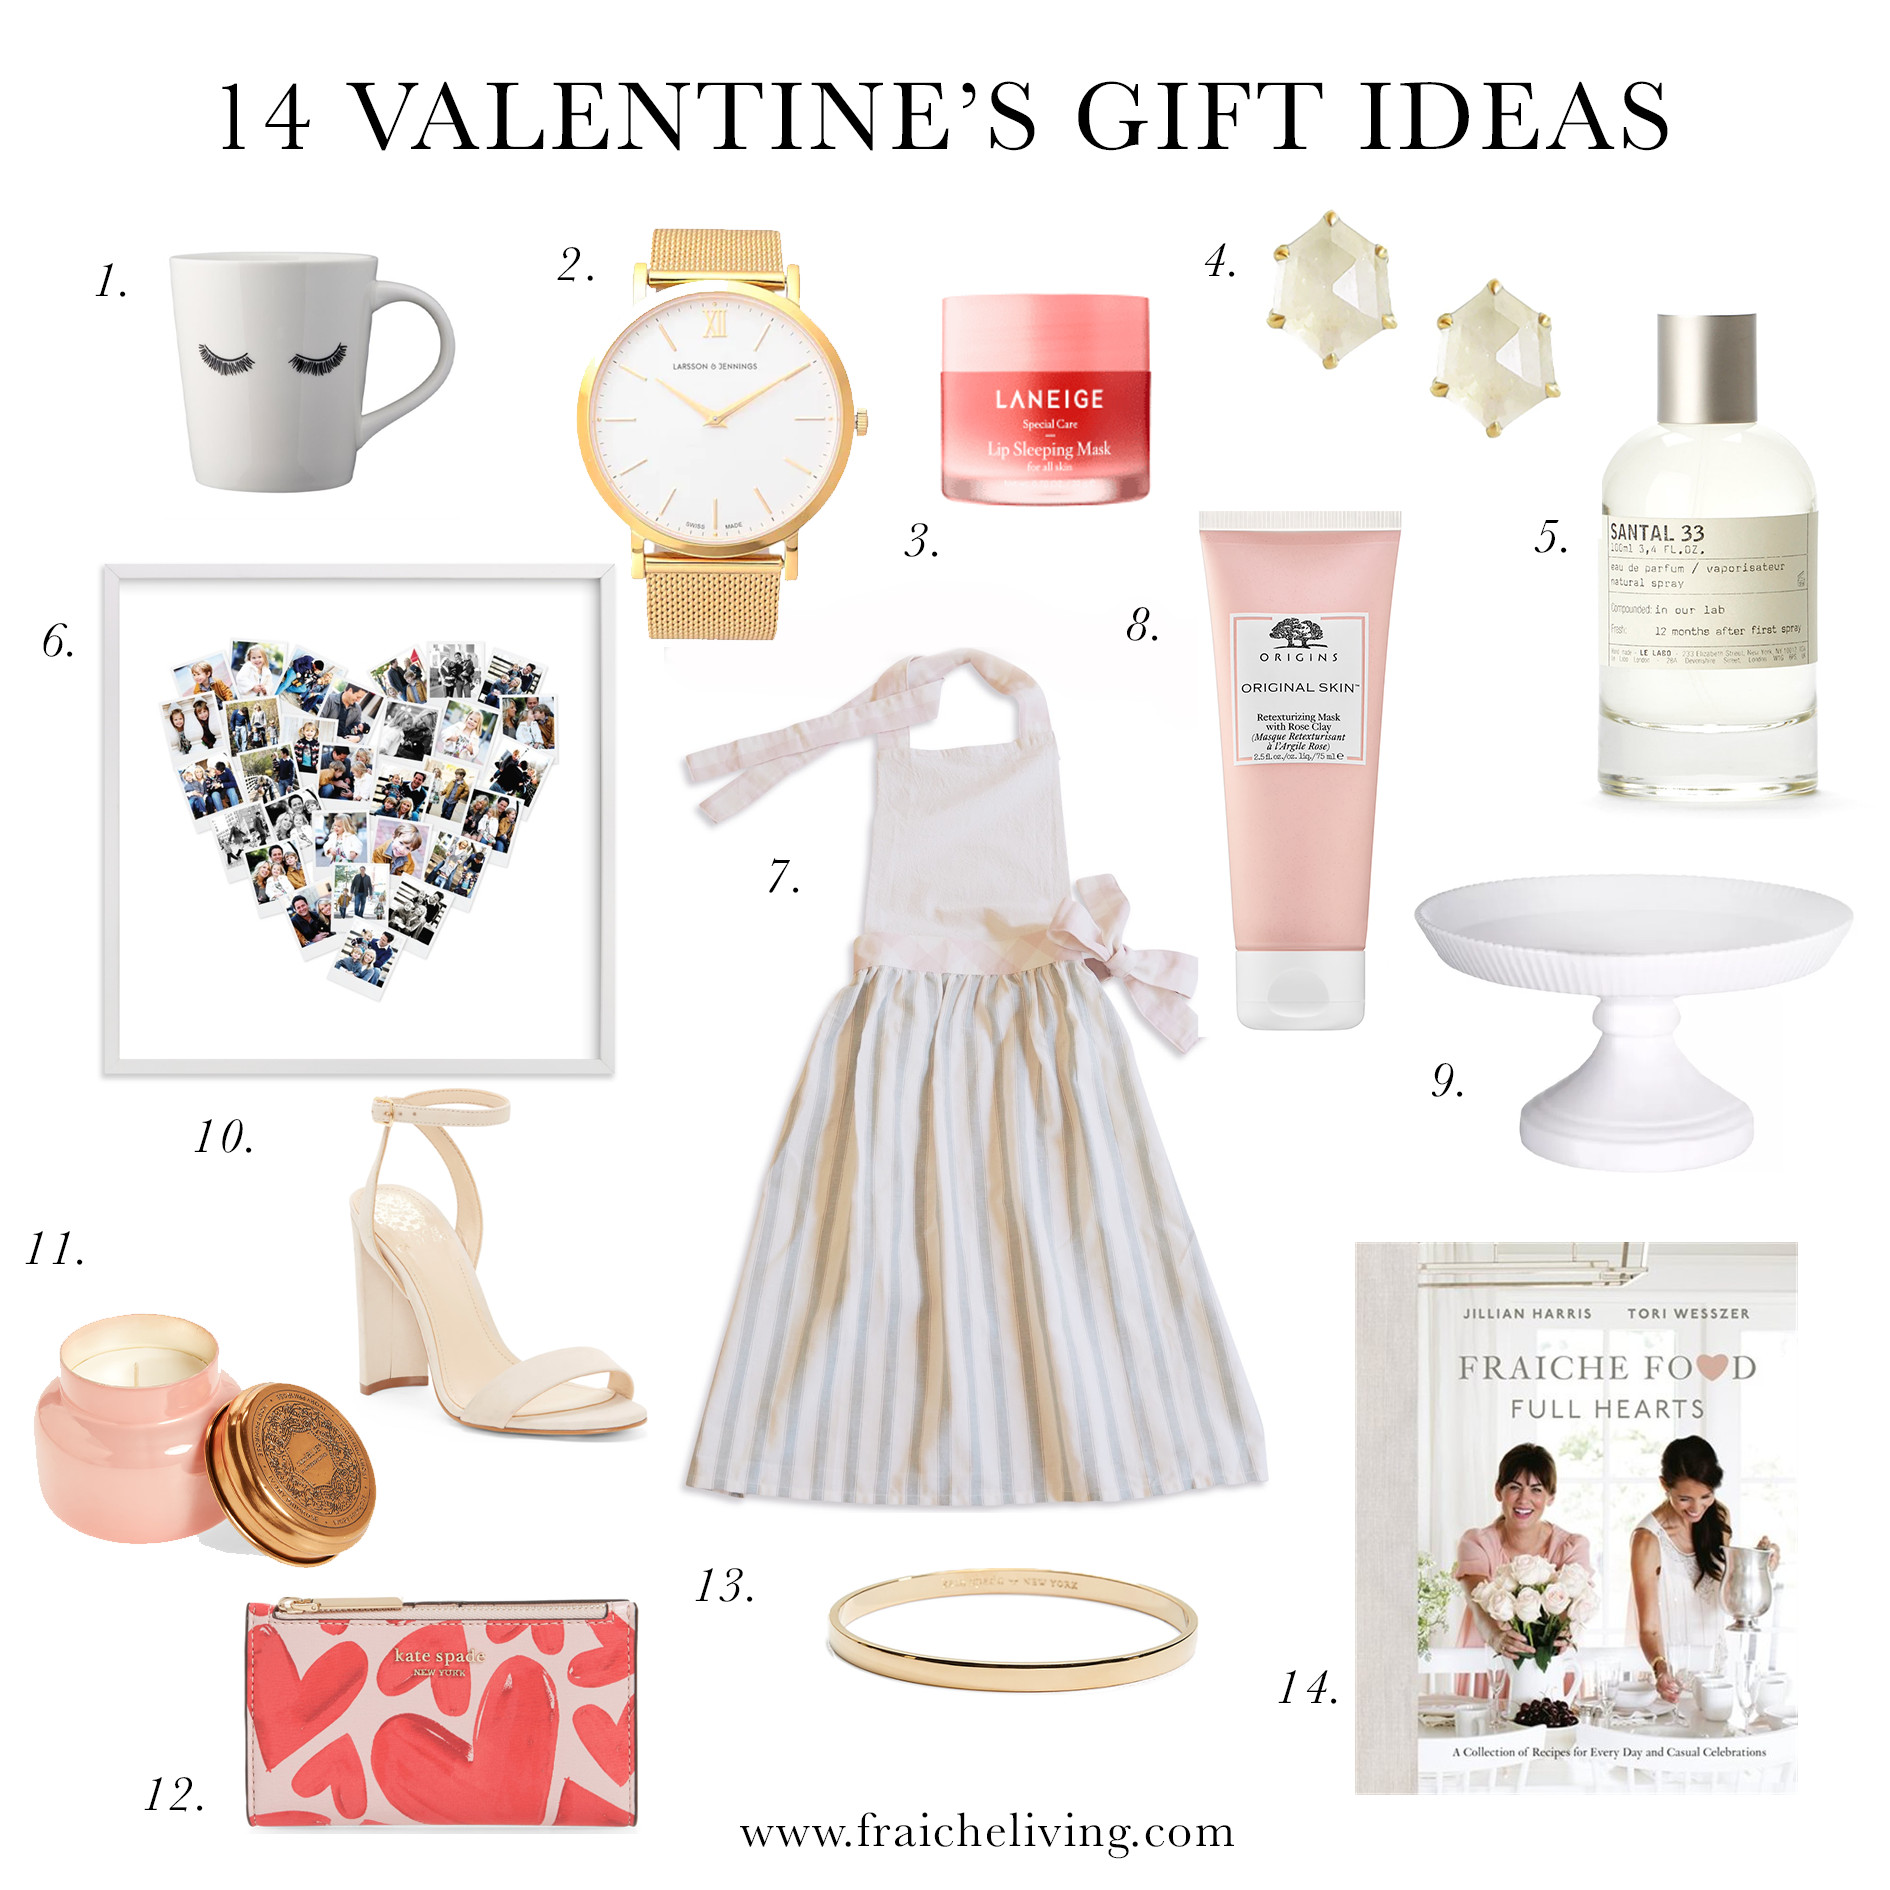 Valentines 2020 Gift Ideas
 14 Valentine s Day Gift Ideas in 2020 With images